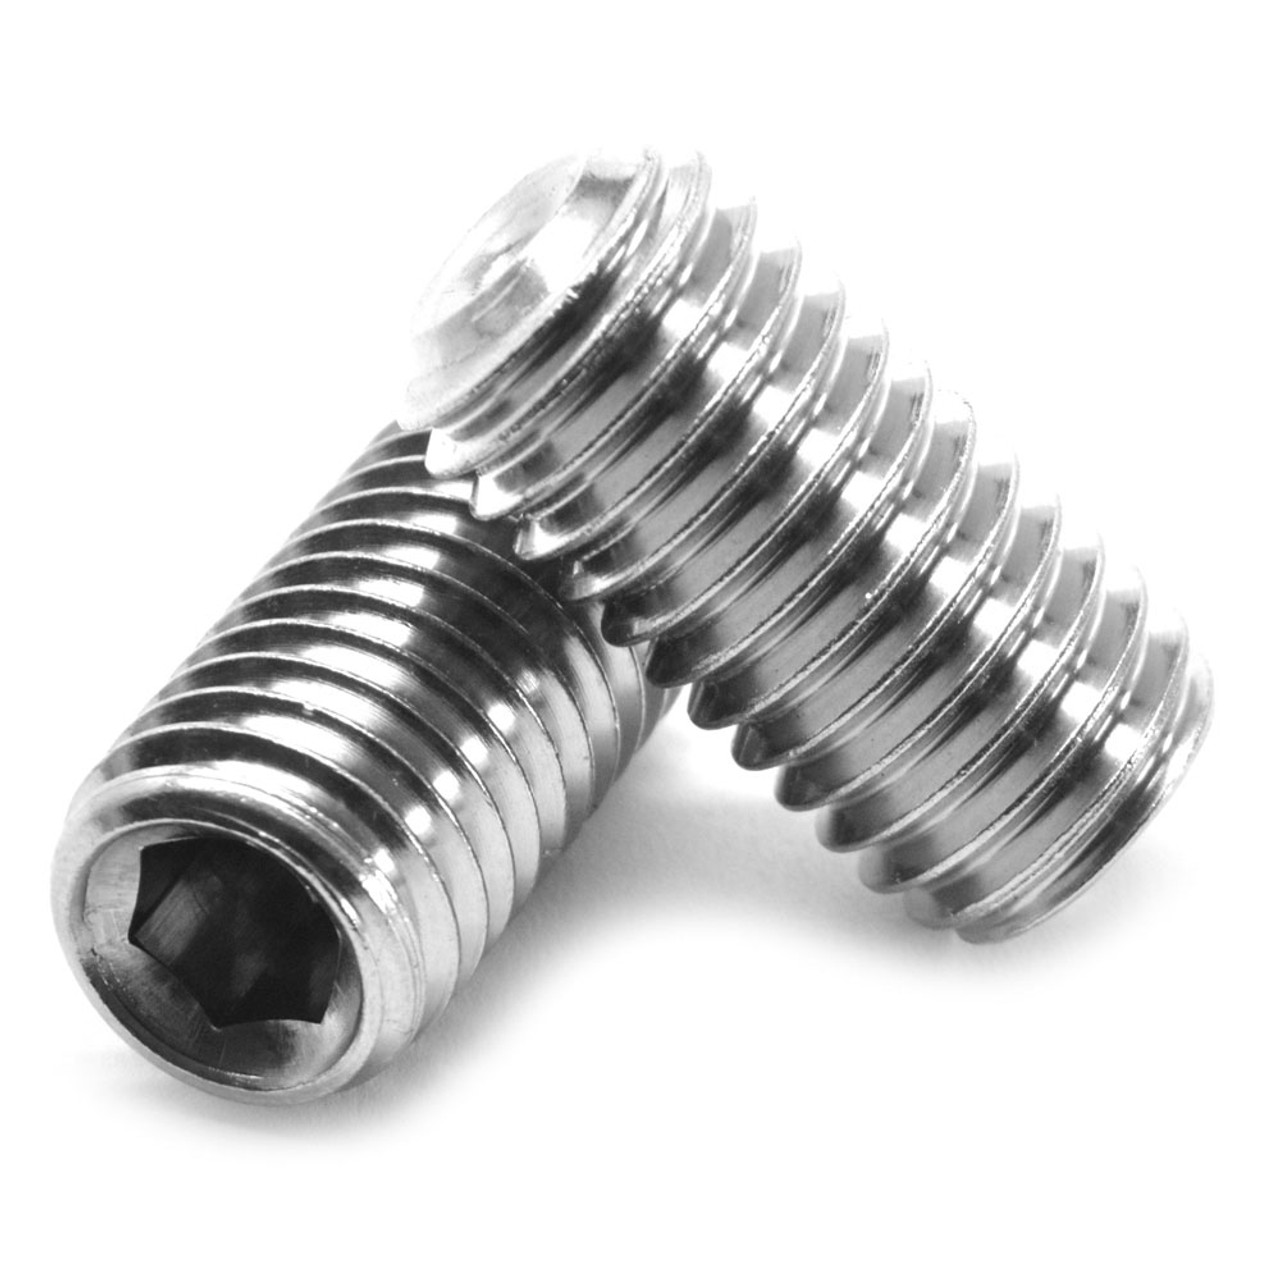 M10 x 1.50 x 45 MM Coarse Thread DIN 916 / ISO 4029 Socket Set Screw Cup Point Stainless Steel 316